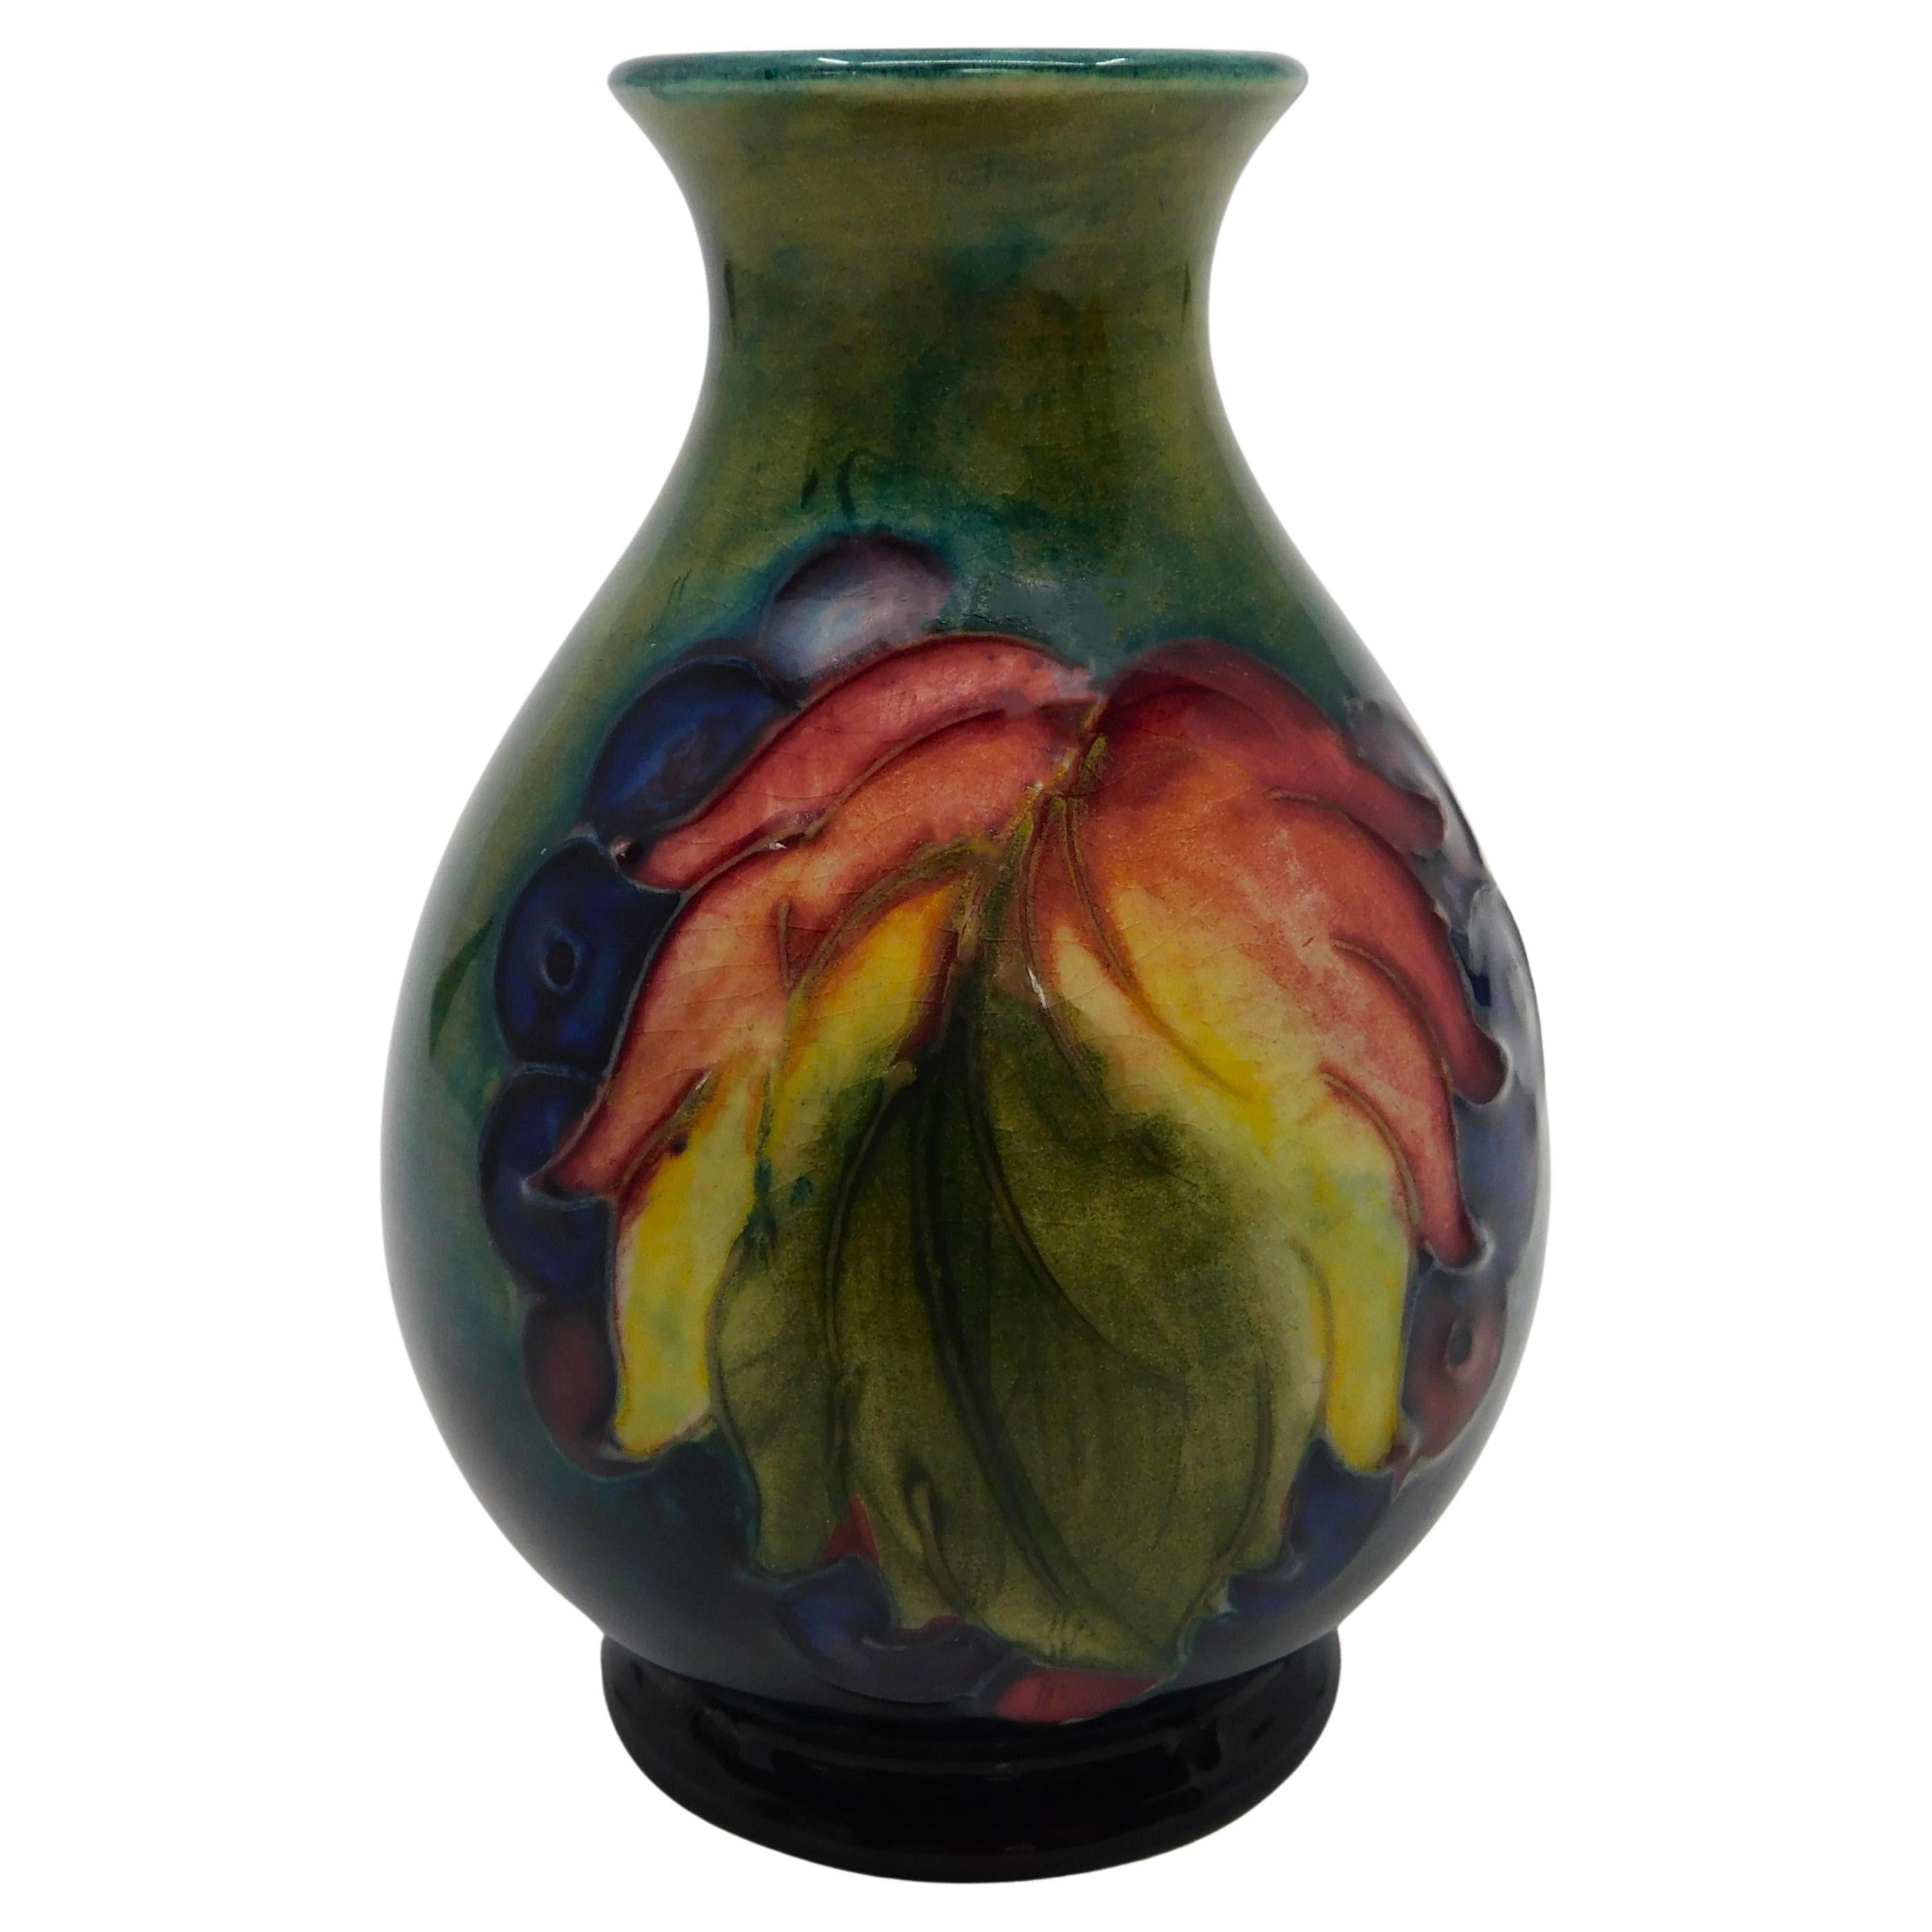 This beautiful art pottery vase was done by the Moorcroft Pottery company of England in circa 1940 using their signature deep cobalt blue ground and done in the 'Leaf and Berry' pattern.  Designed and produced by William Moorcroft It features fine